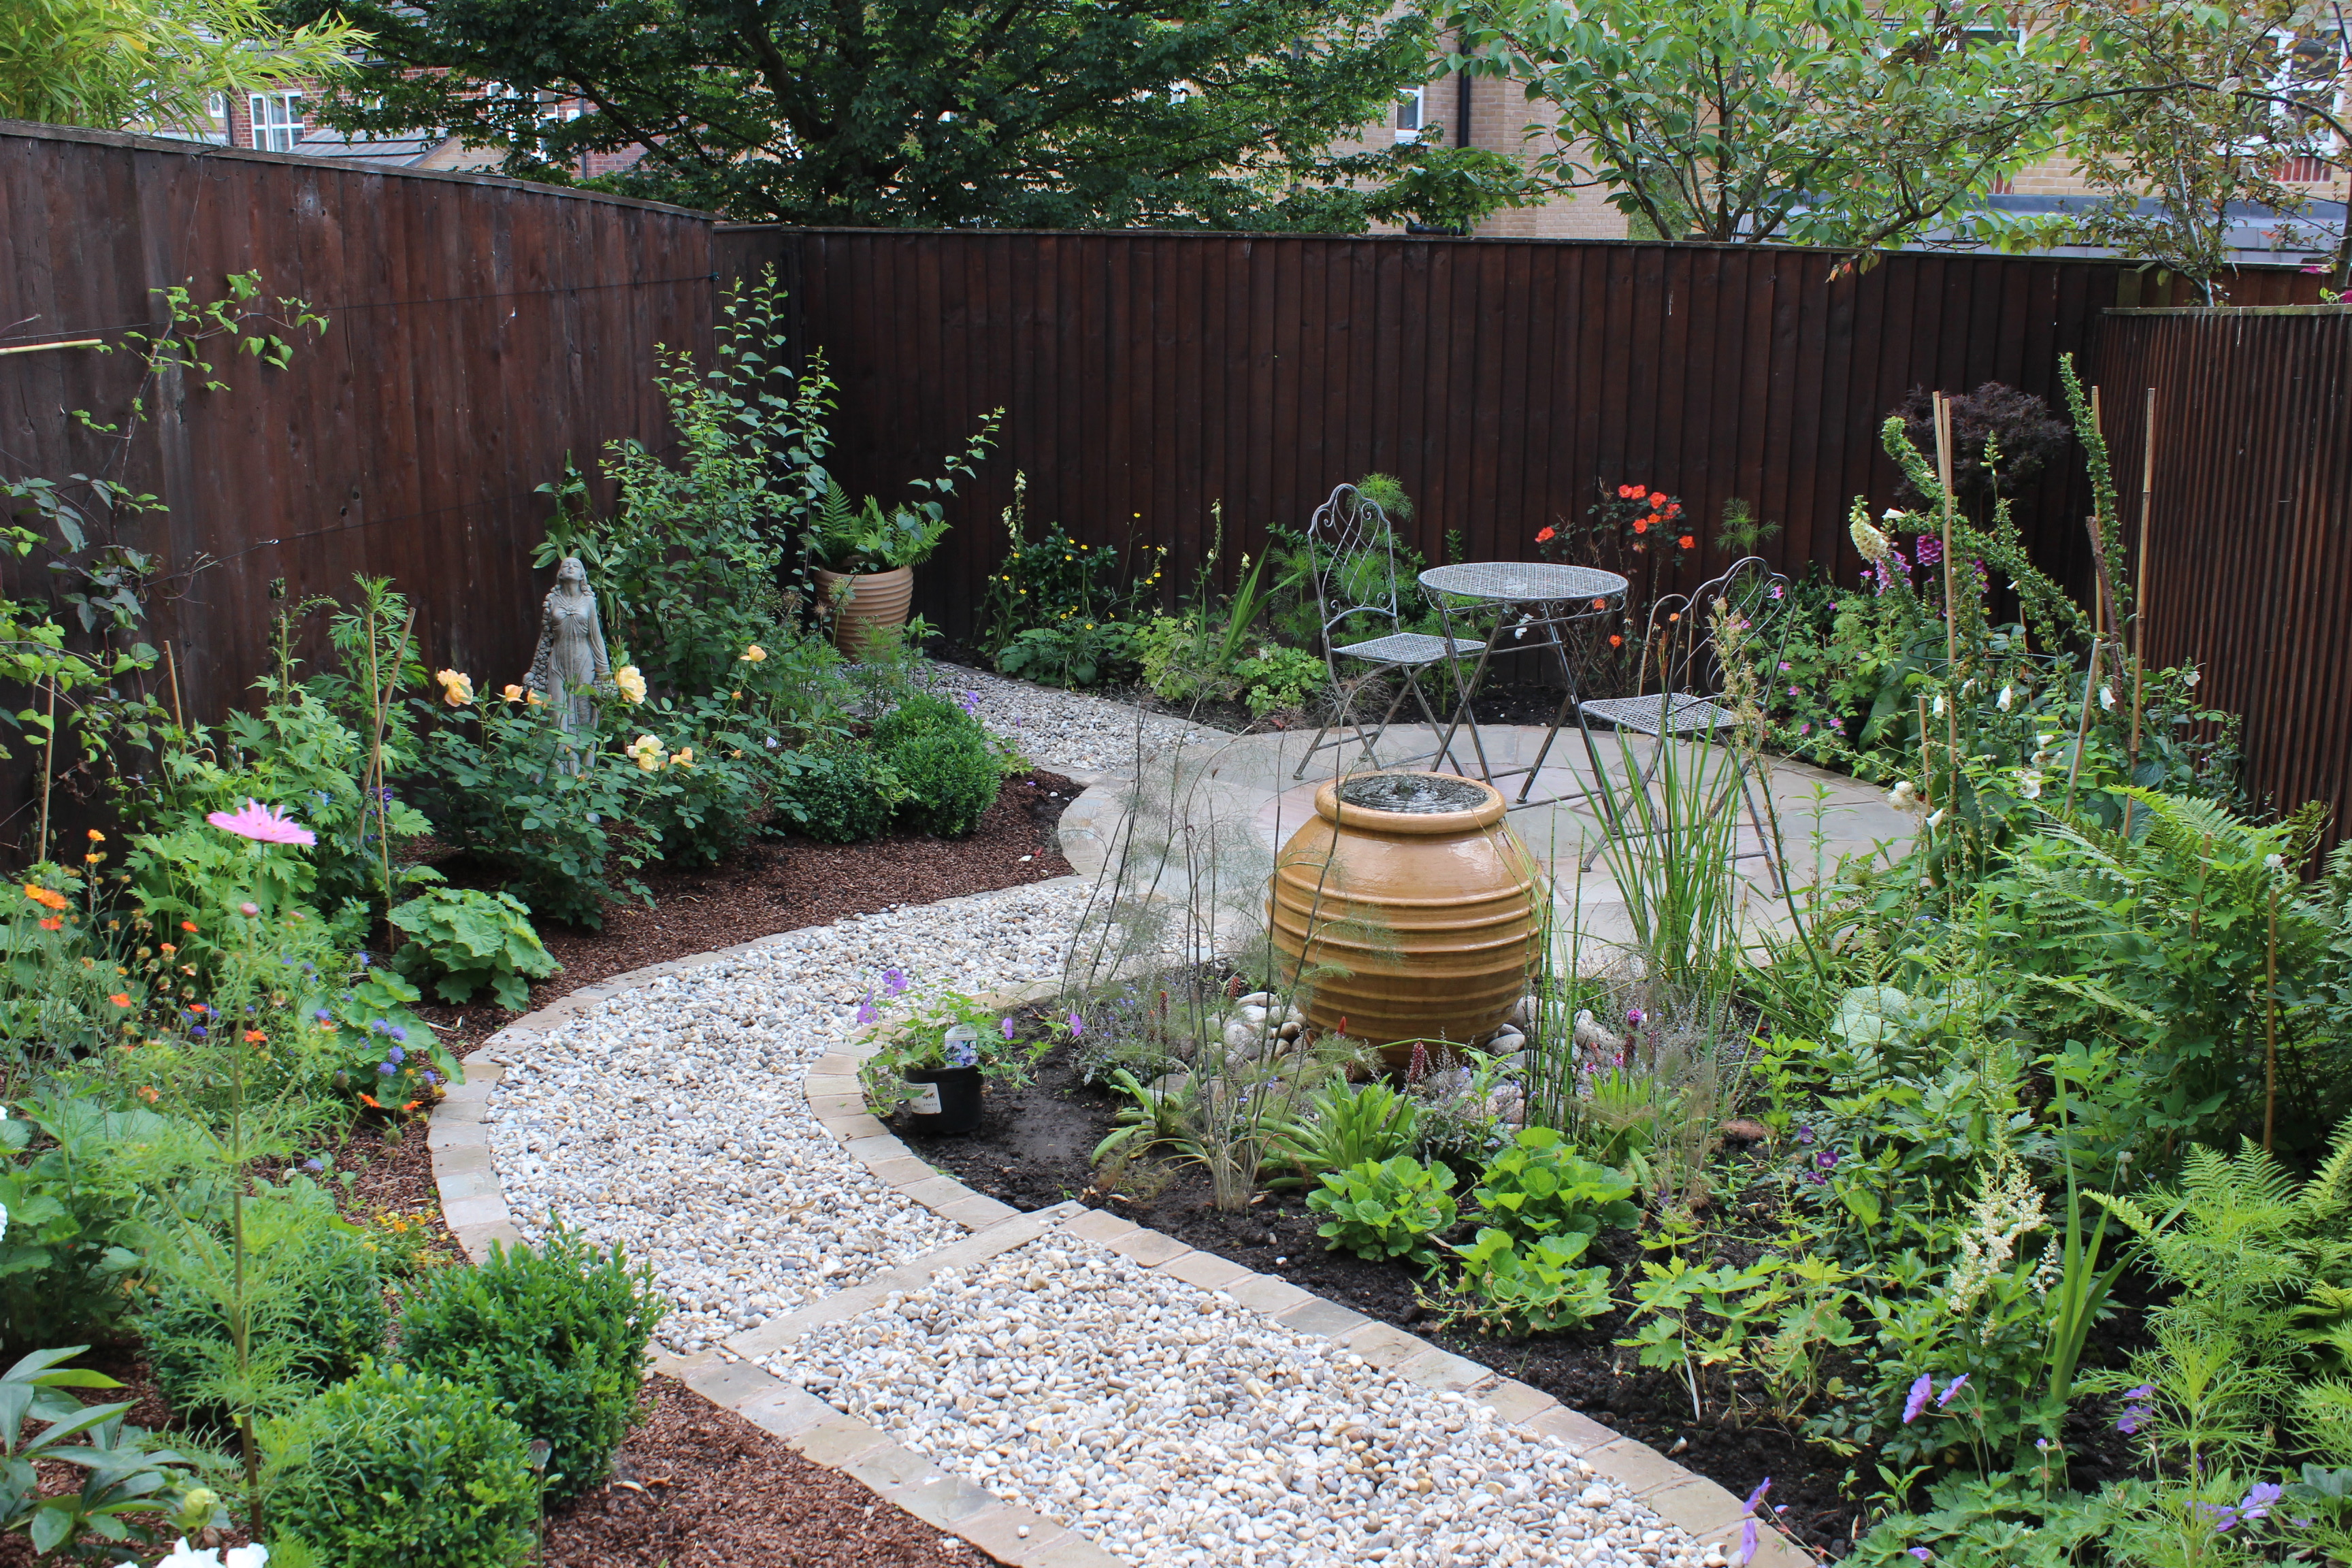 </p> <p>Find your ideal home design pro on designfor-me.com - get matched and see who's interested in your home project. Click image to see more inspiration from our design pros</p> <p>Design by Lindsay, garden designer from West Lancashire, North West</p> <p> #gardendesign #gardeninspiration #gardenlove #gardenideas #gardens </p> <p>